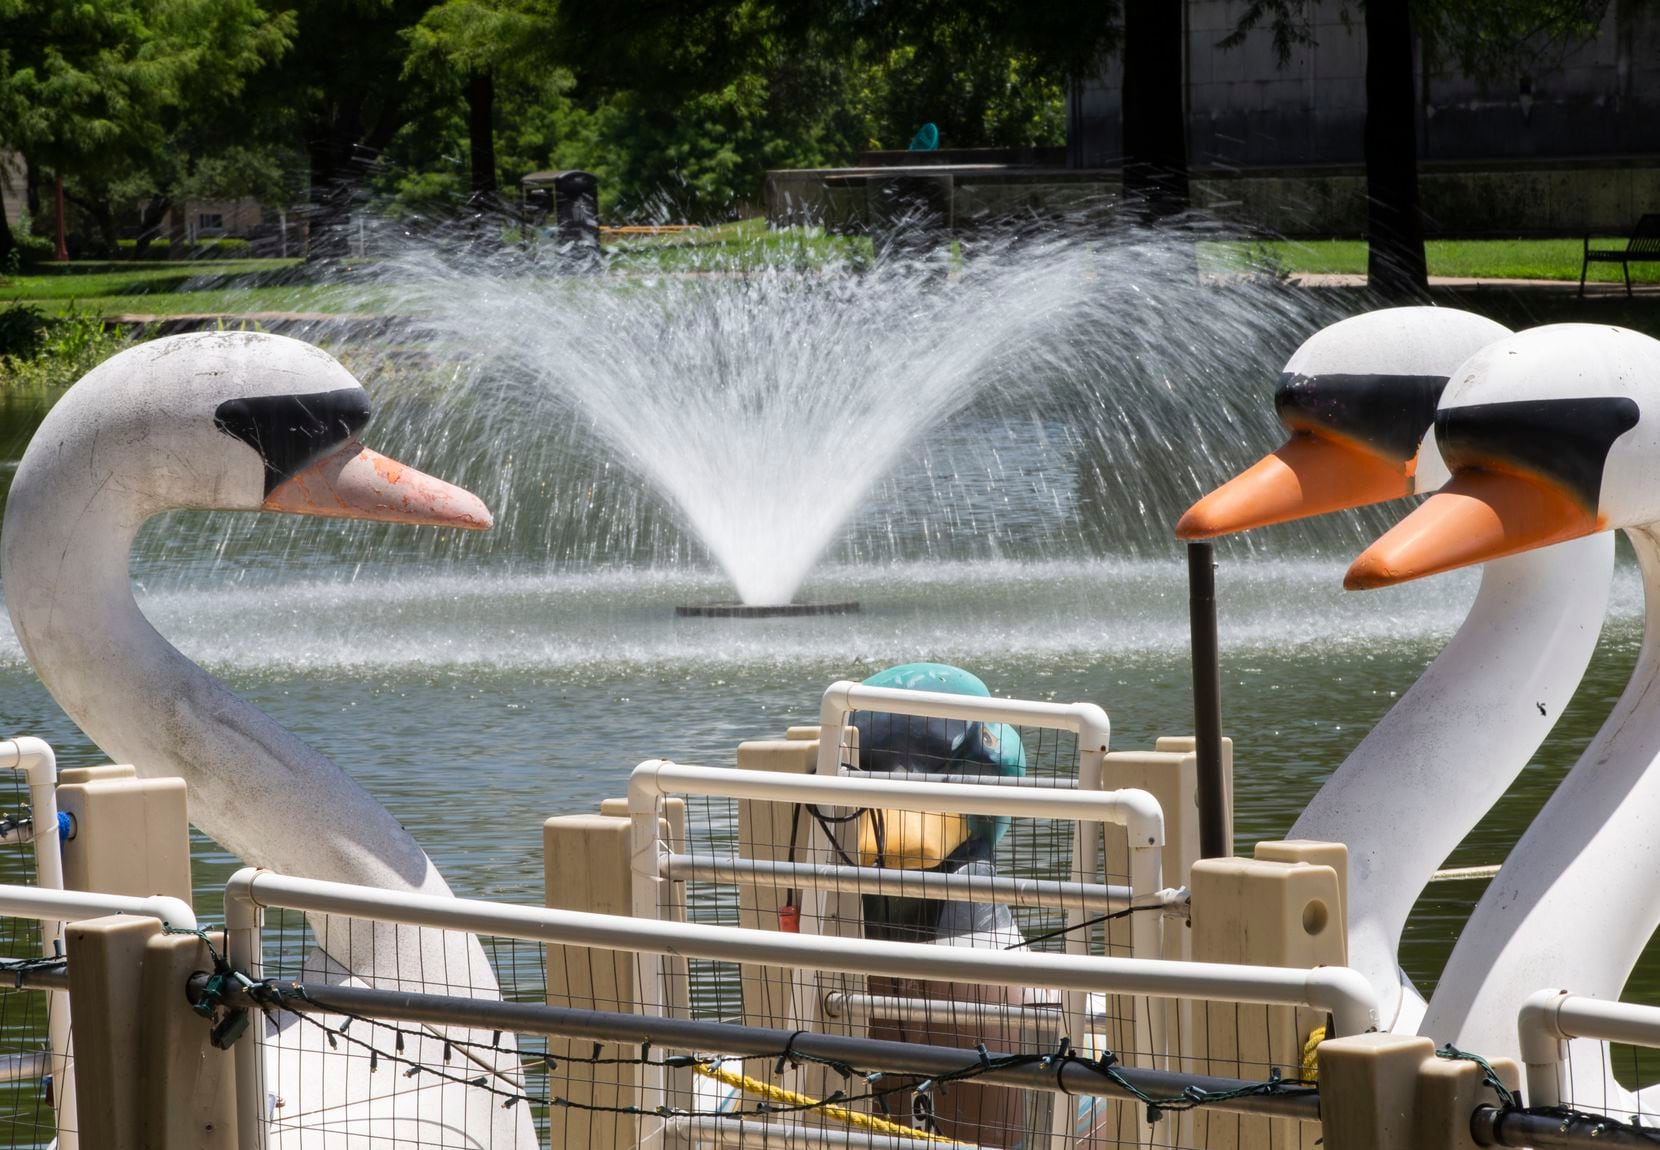 The "paddle boat swans" remained docked at Fair Park on a recent Friday as the park sat almost entirely empty. The hope is that the new funding mechanism approved by the Legislature will make Fair Park a year-round destination.